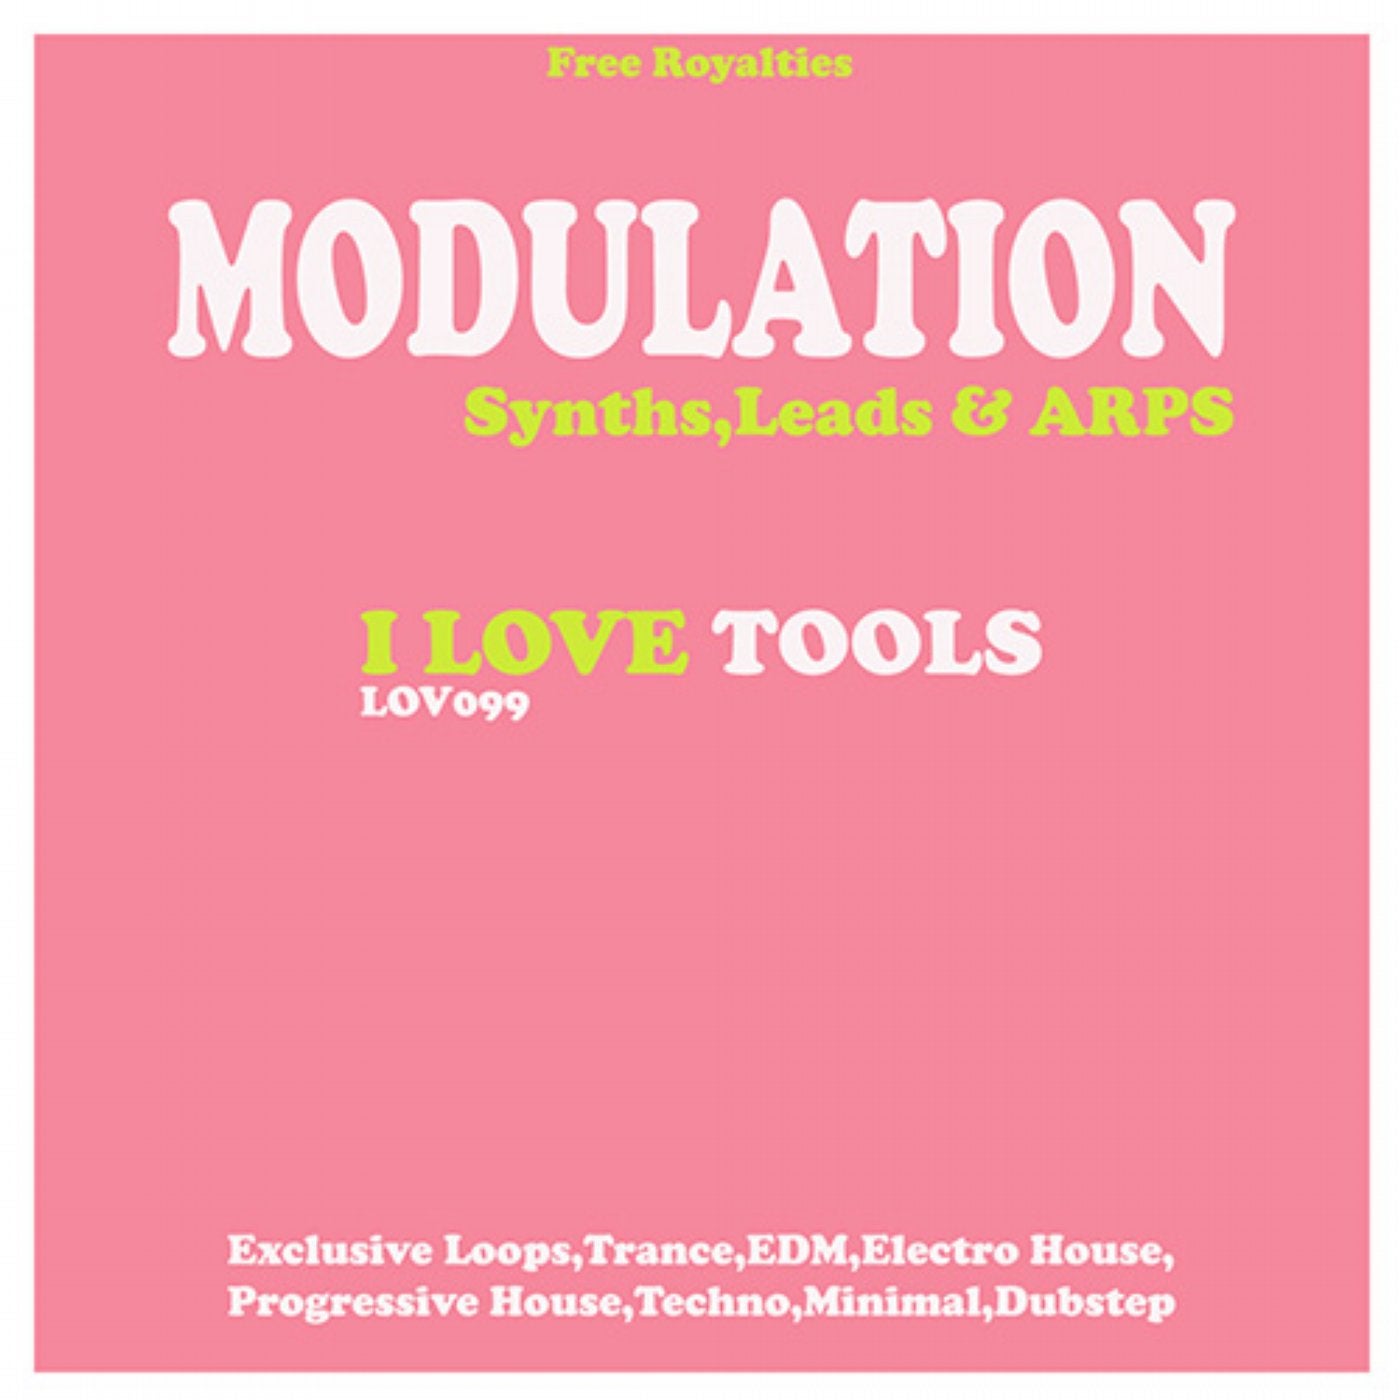 MODULATION Synths,Leads & ARPS Loops